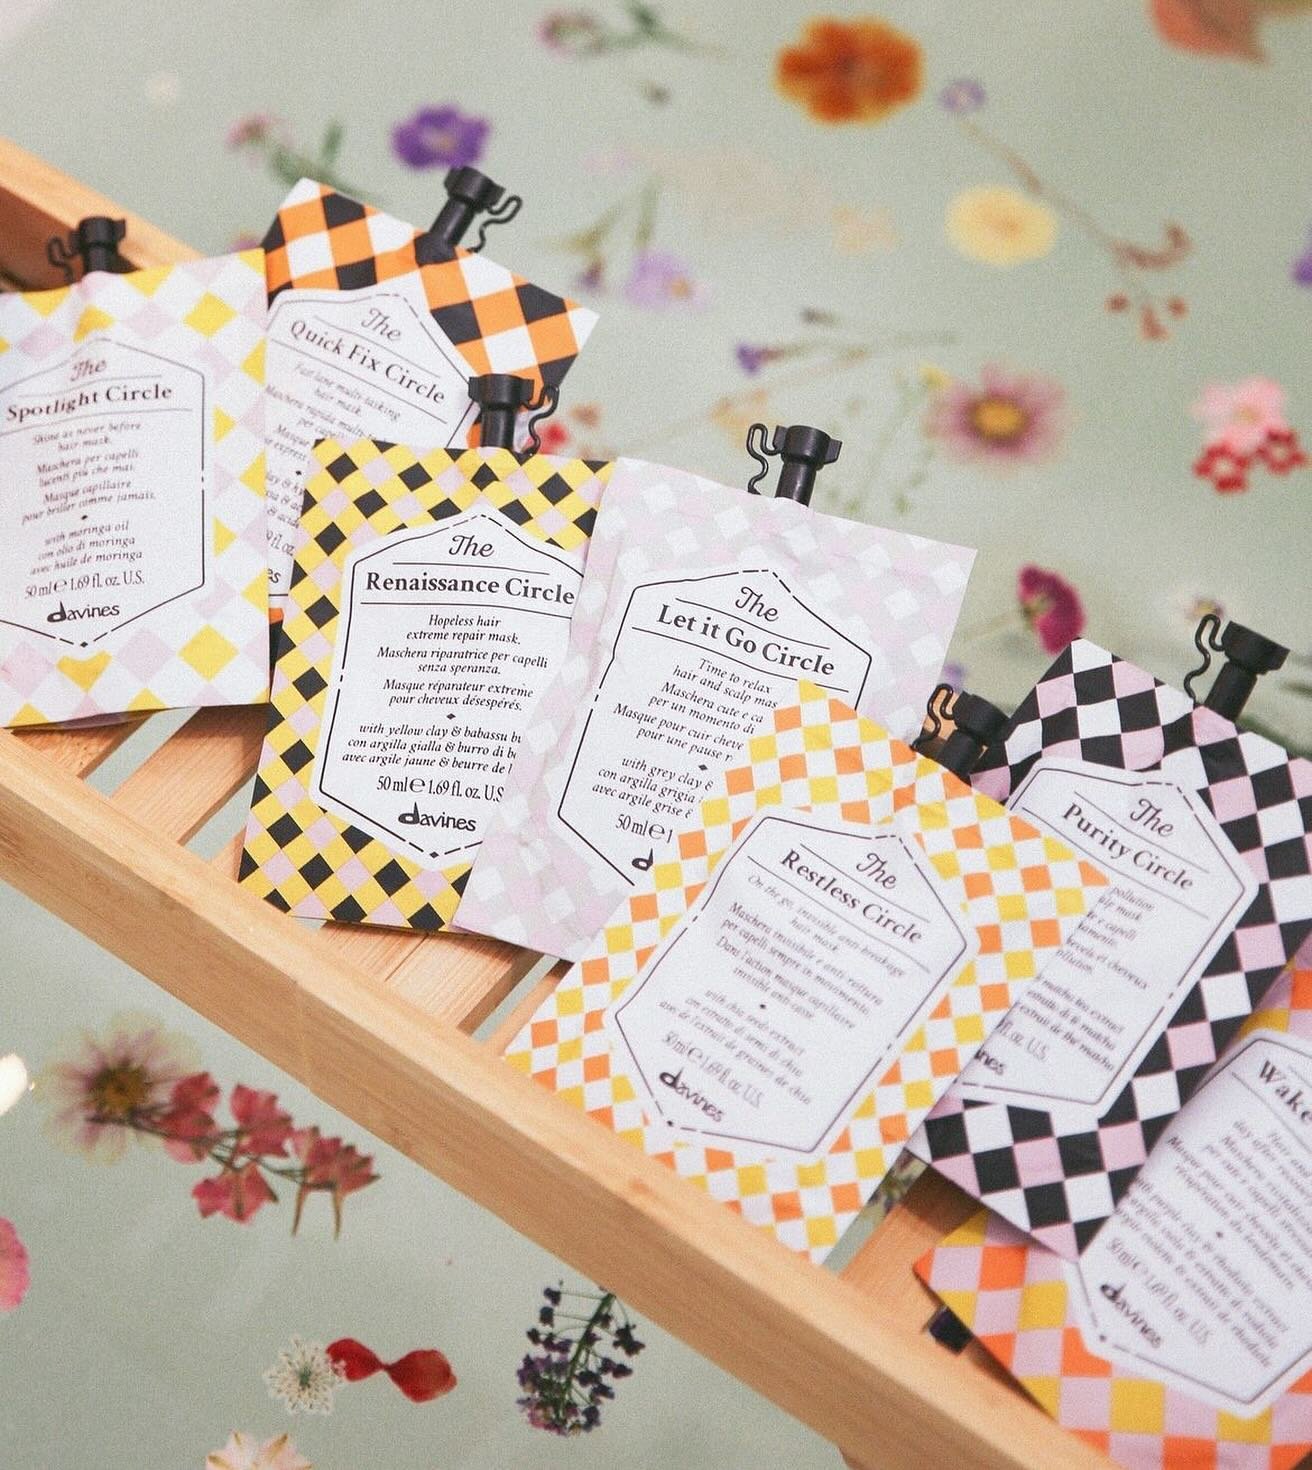 A hair mask for every occasion ✨ Davines Circle Chronicles masks are perfect for your ever-changing hair needs - each resealable packet was created to address a different hair concern for fast and targeted results in 15 minutes or less! 🌸🌼🪻

Ask y